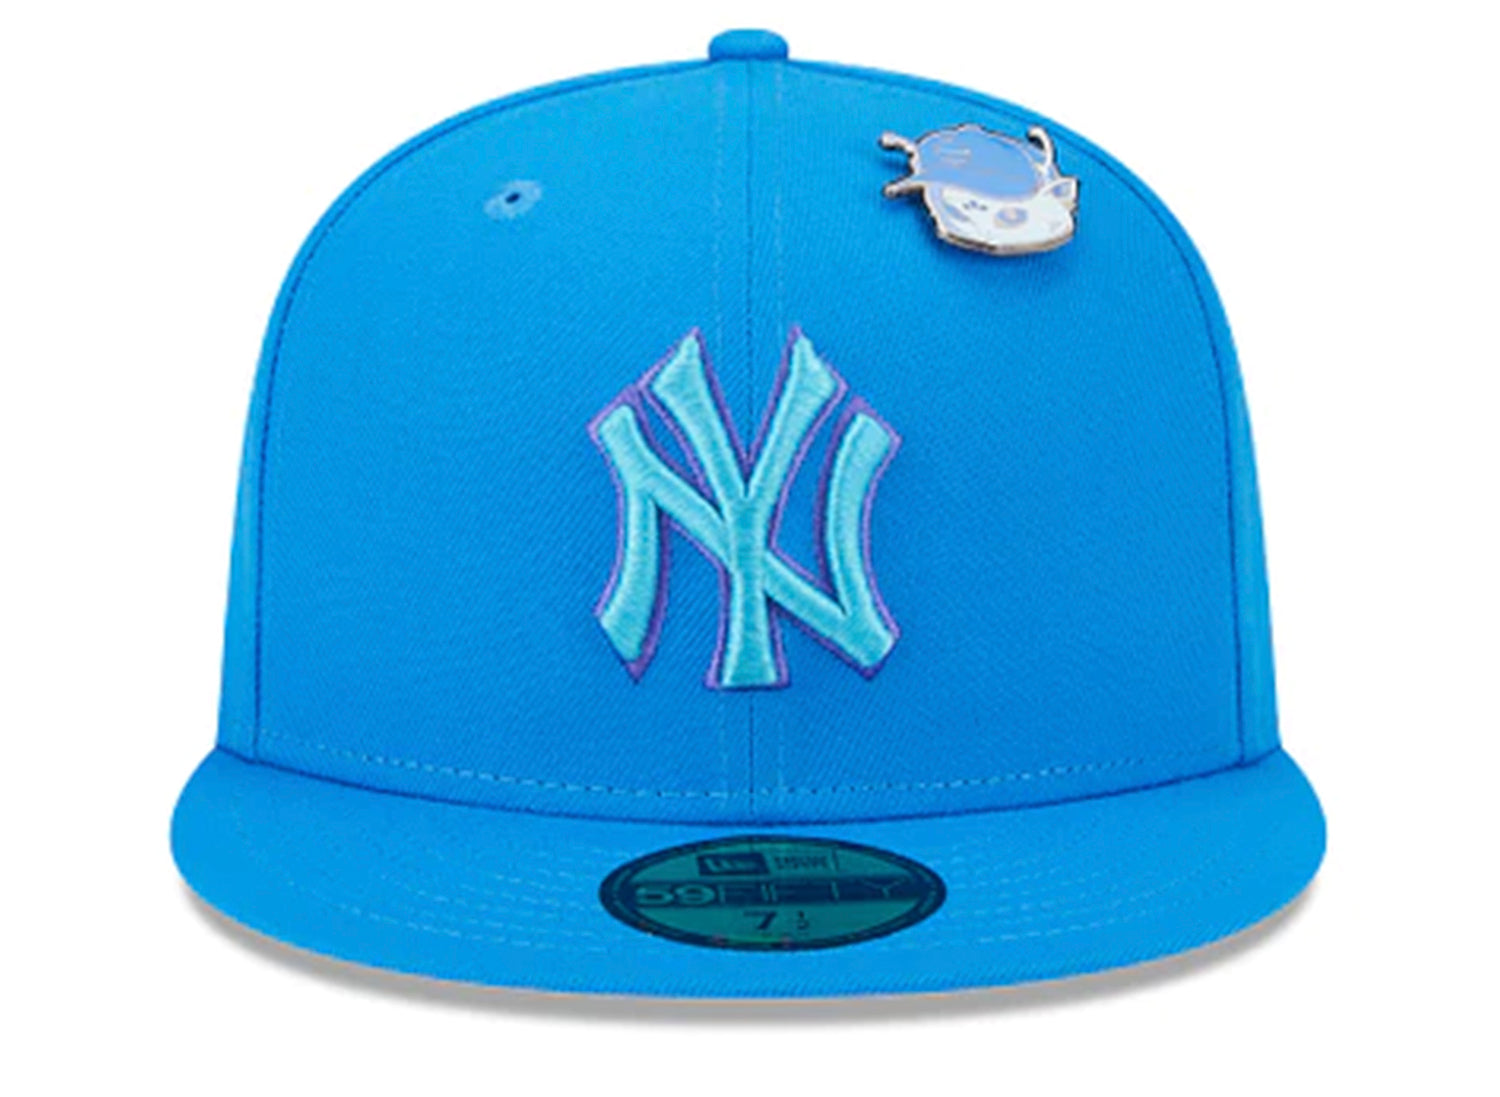 MLB New York Yankees Hat Cap New Era Size 7 1/8 Fitted 59Fifty Baby Blue